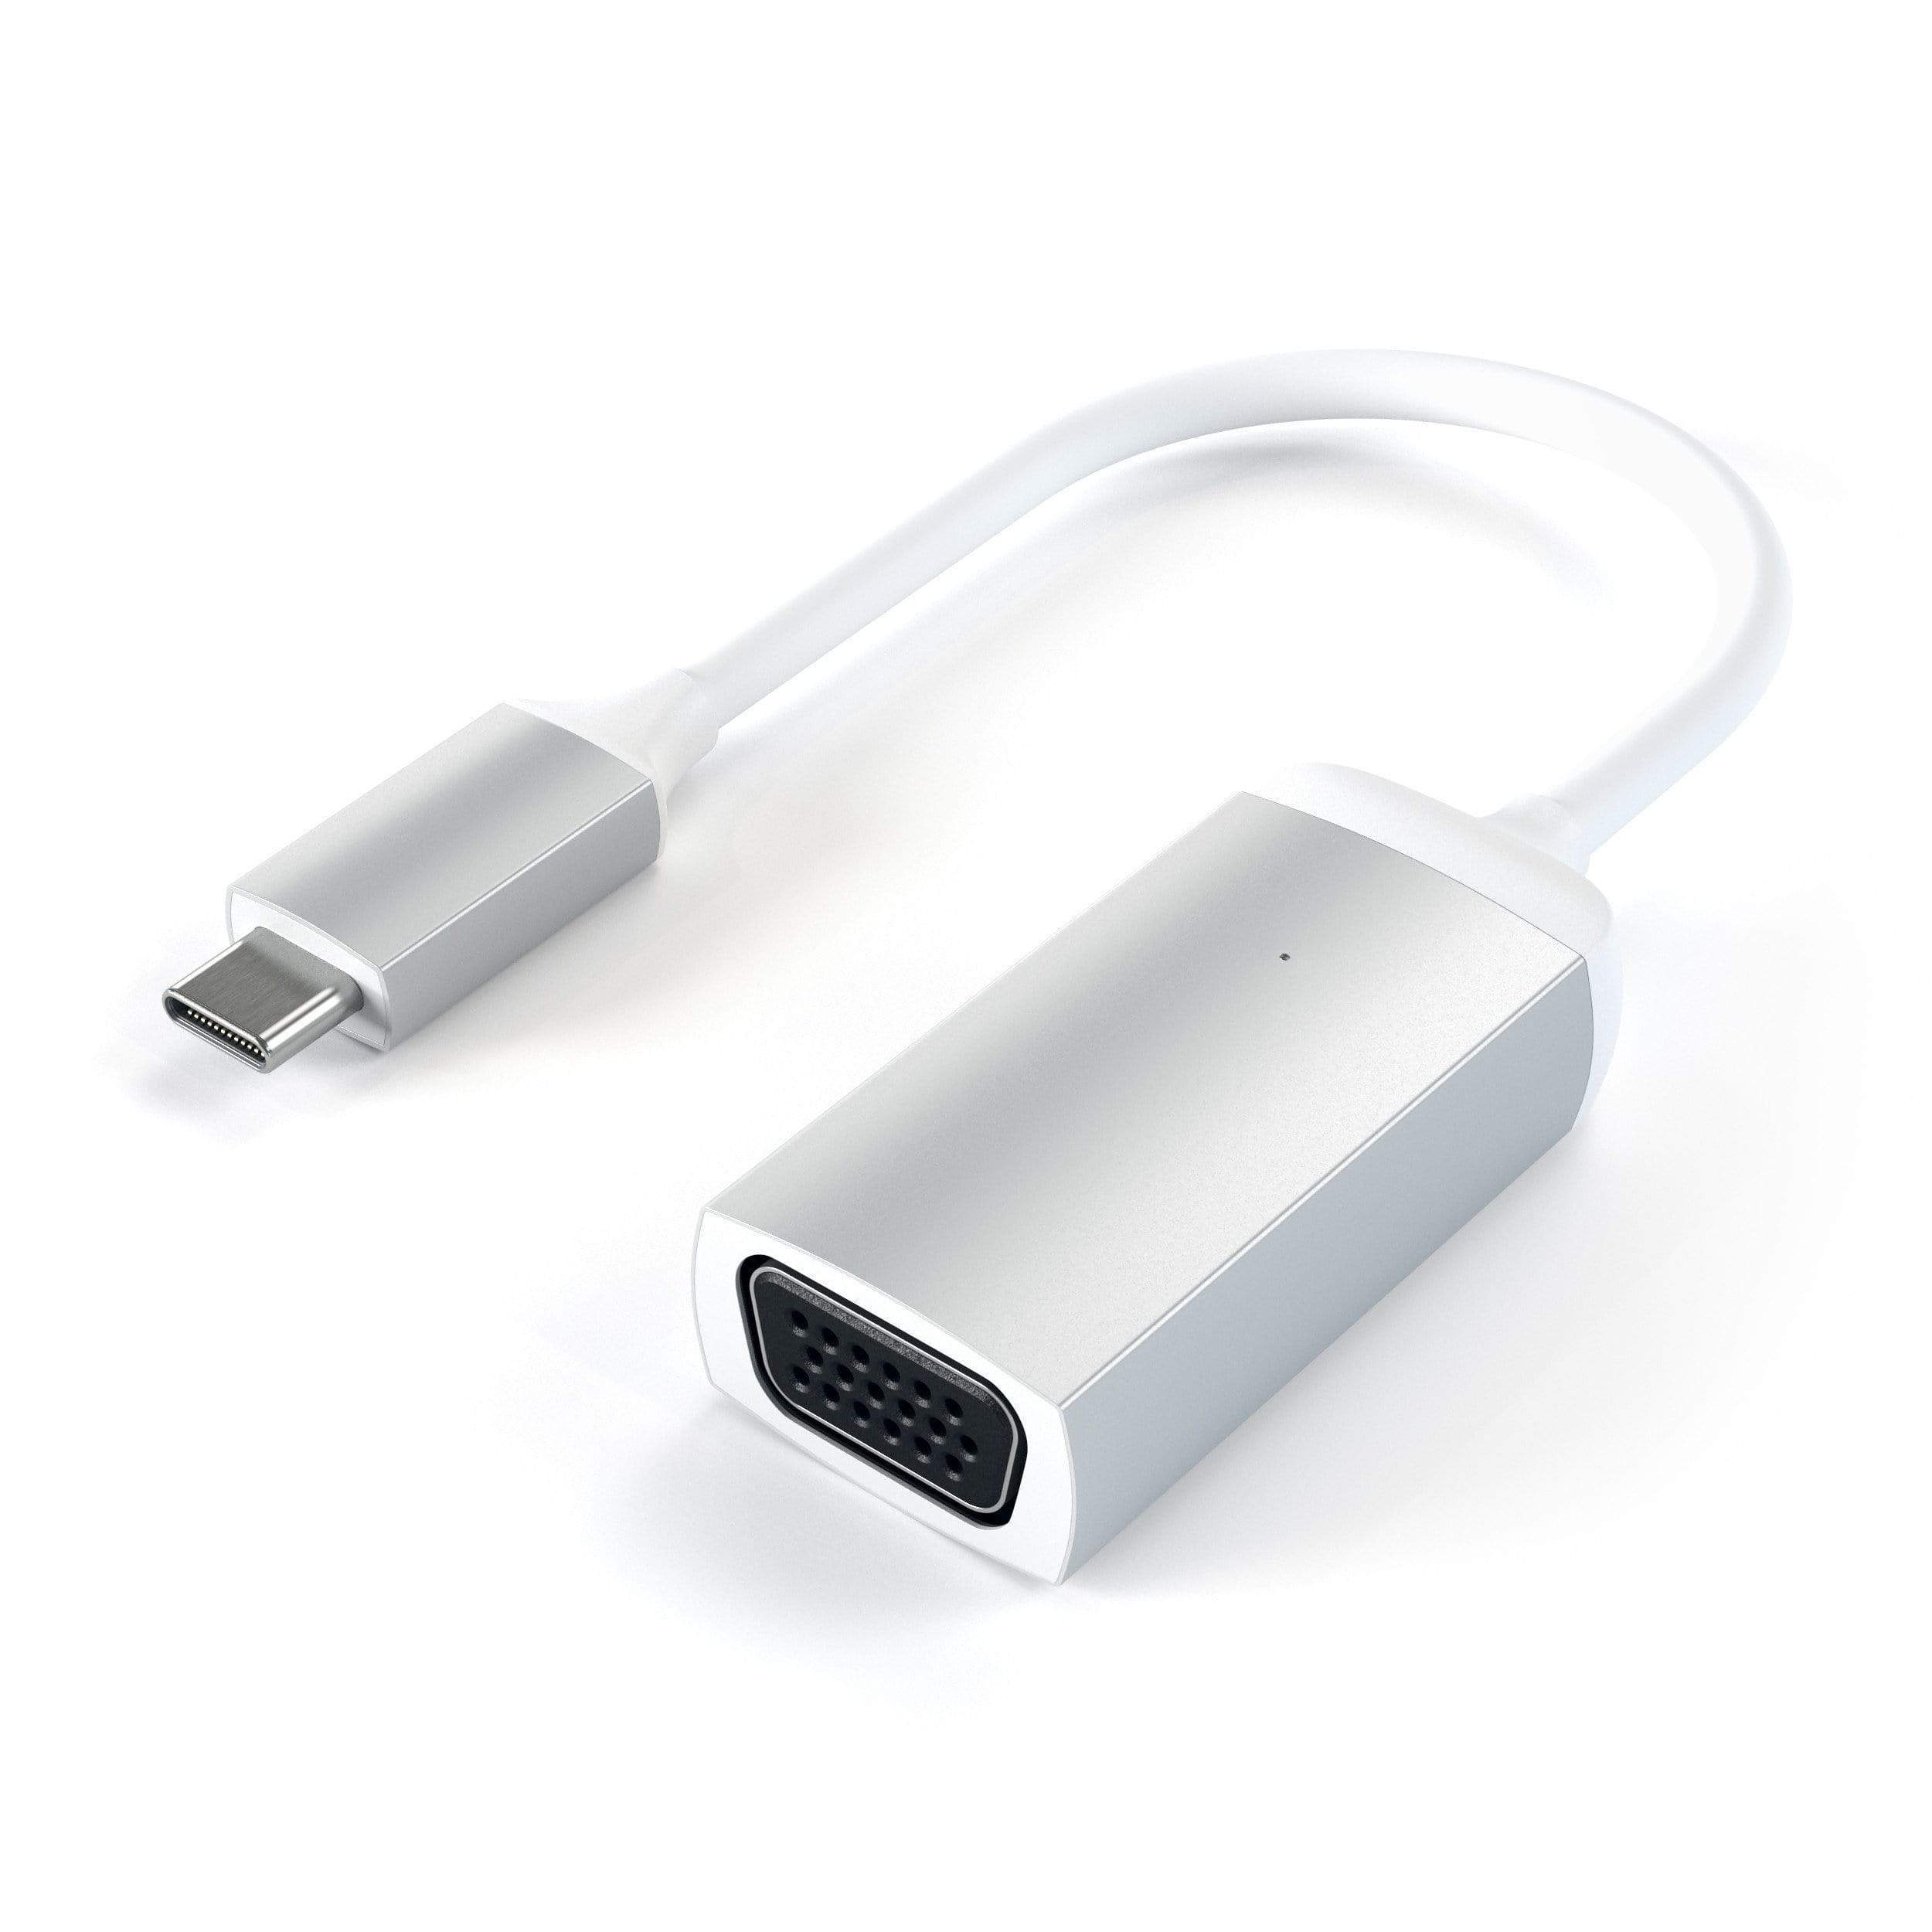 SATECHI TYPE-C TO VGA 1080P 60HZ USB-C CABLE ADAPTER